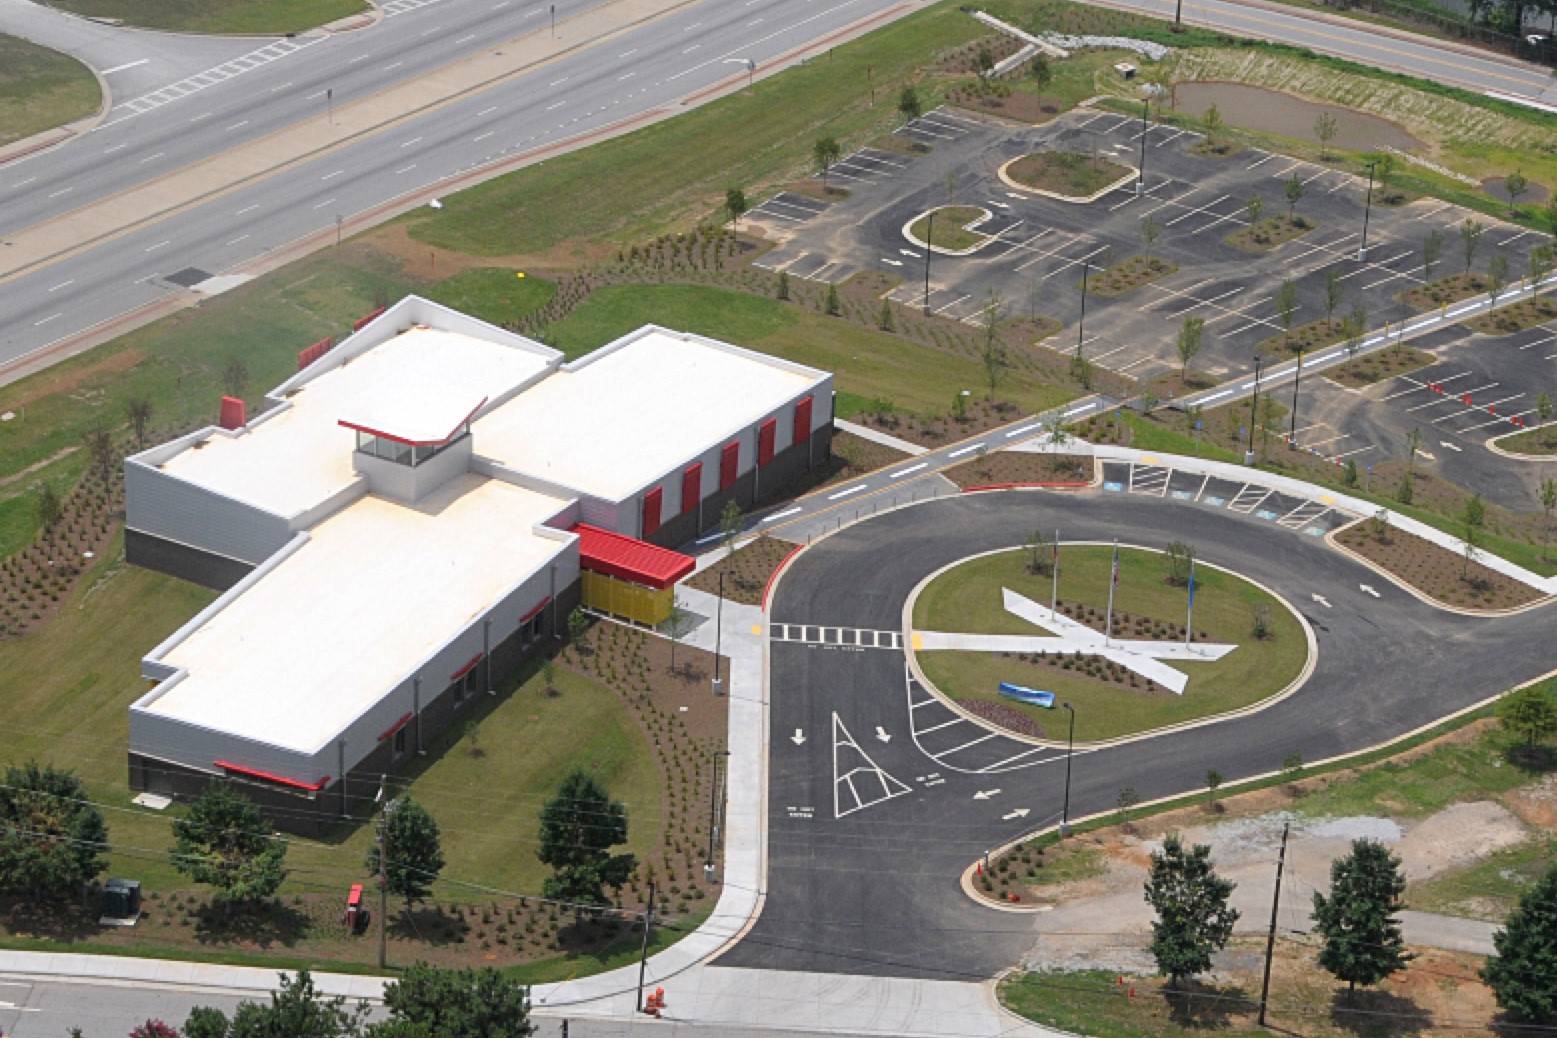 bird’s-eye view of a building and its wide parking space